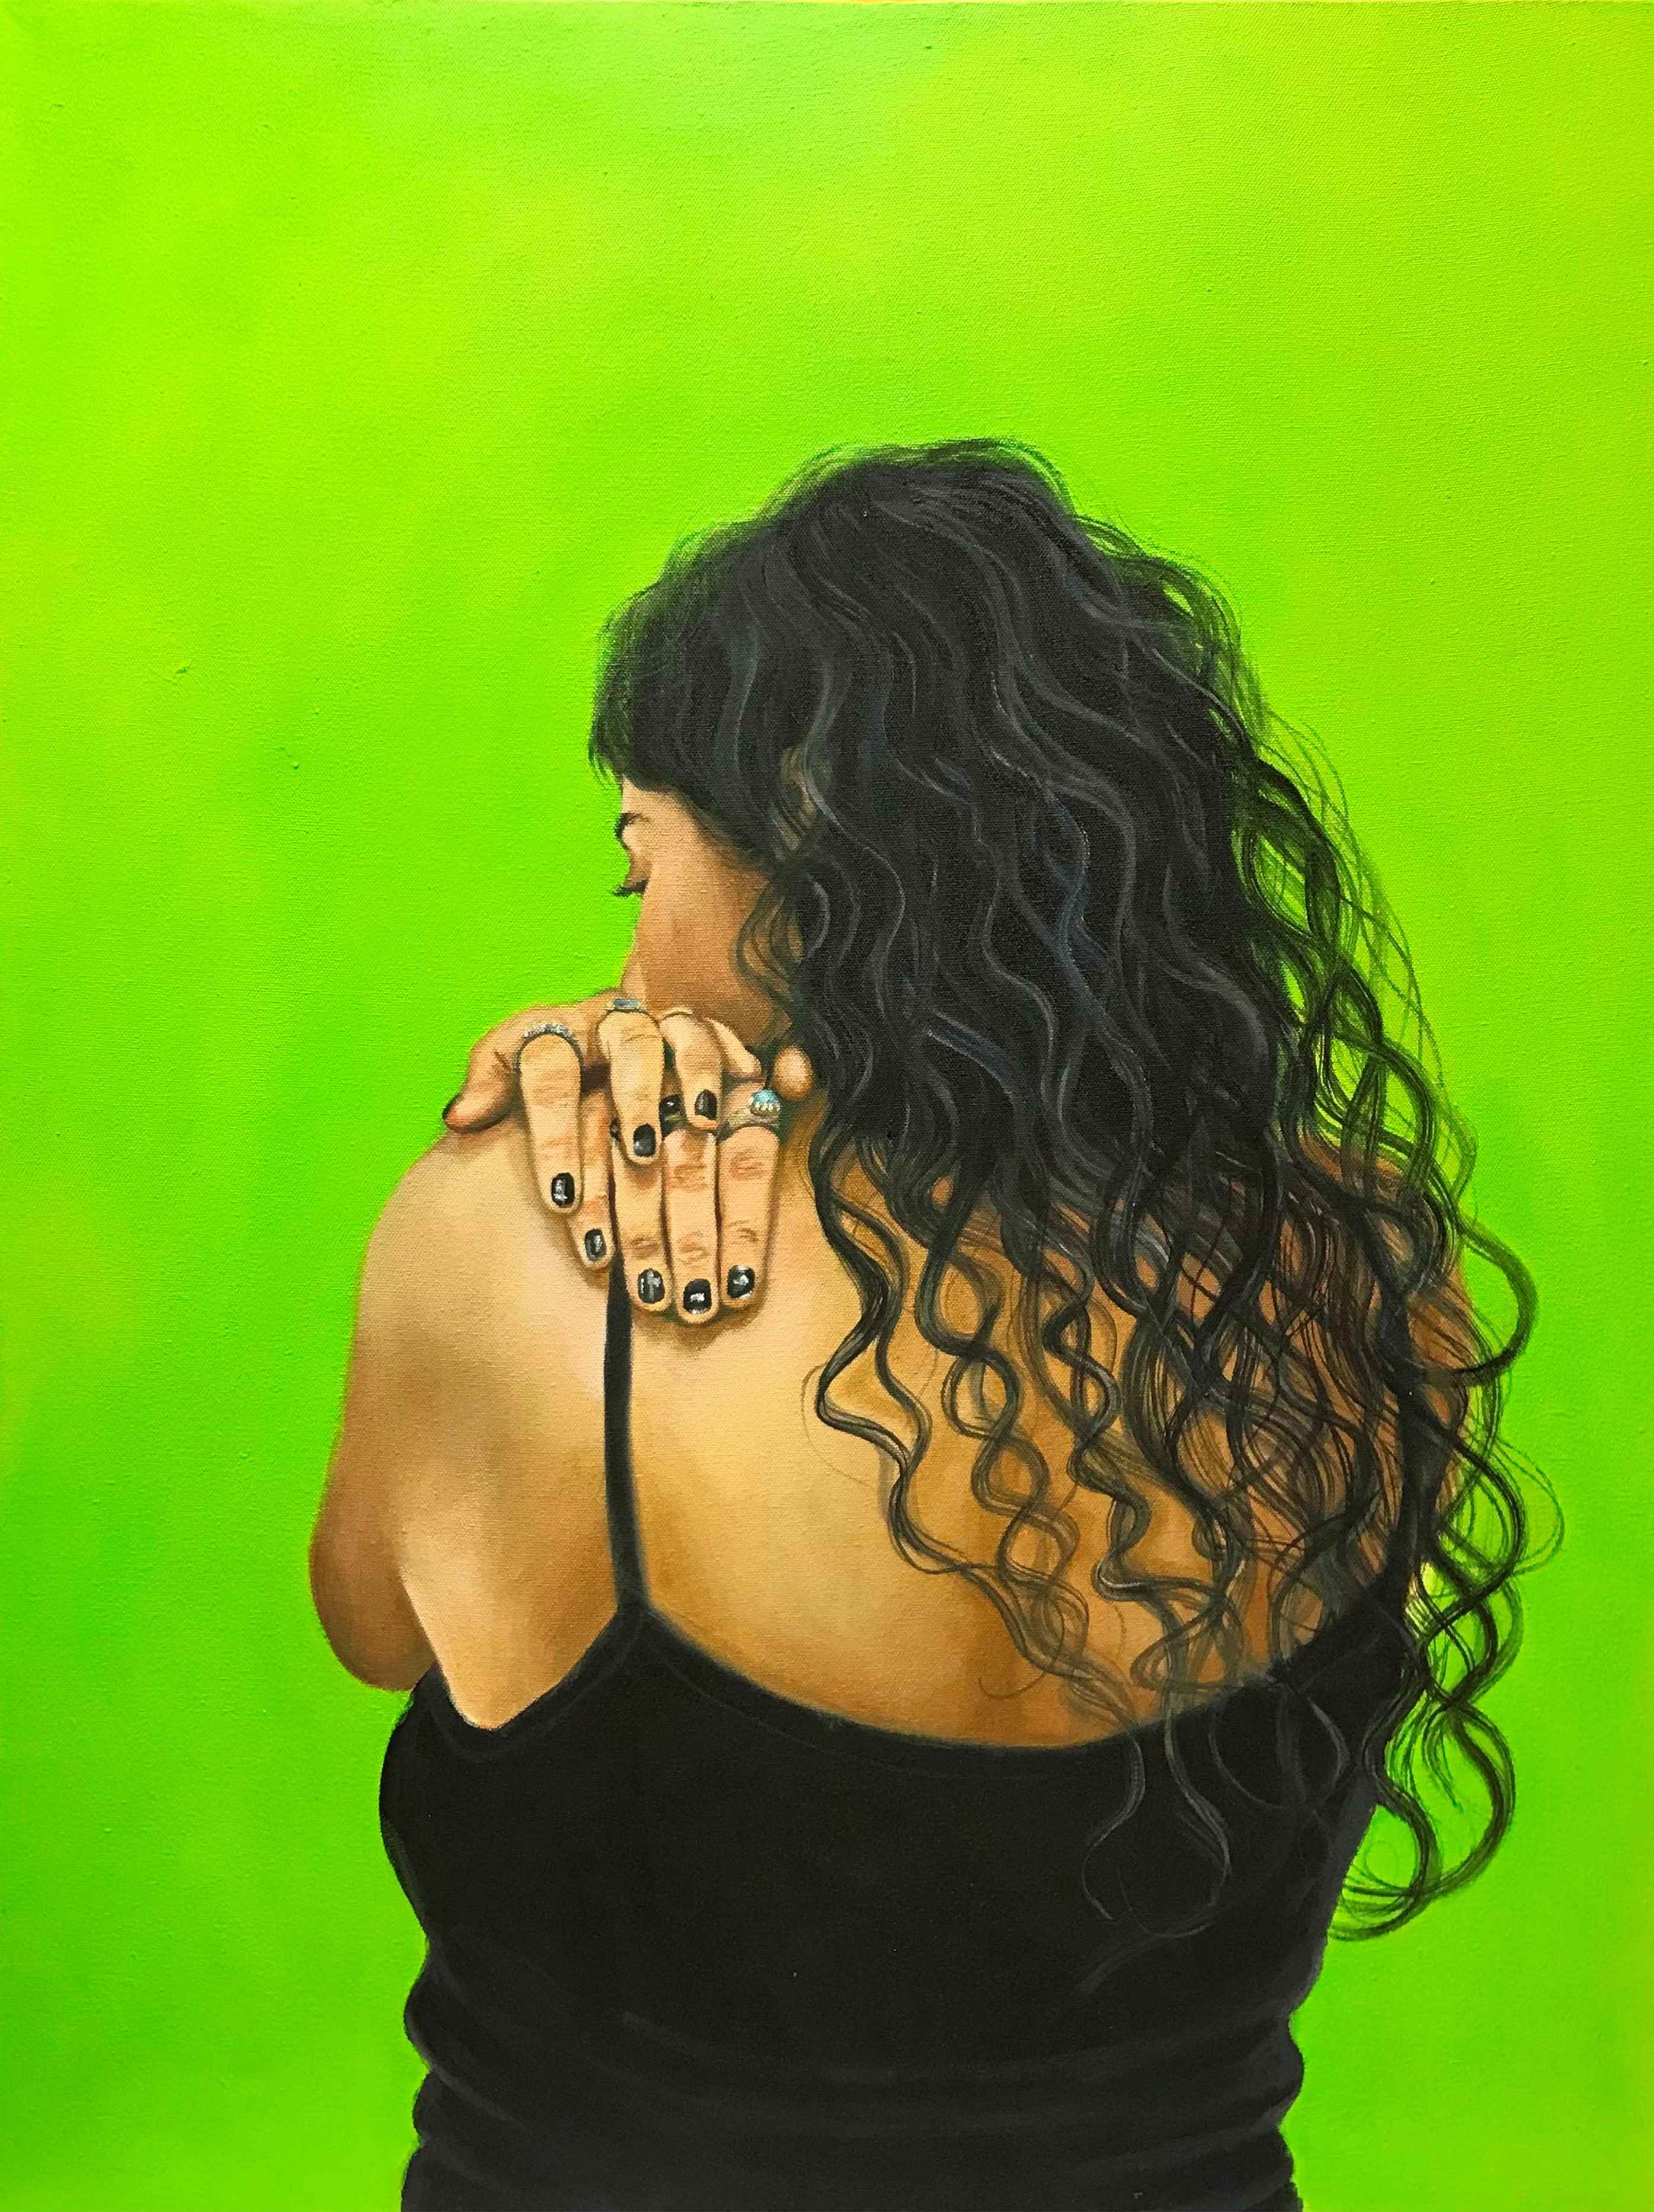 Title:   INTROSPECTION III  <br> Medium: Oil on canvas<br> Size: 30x24 inches